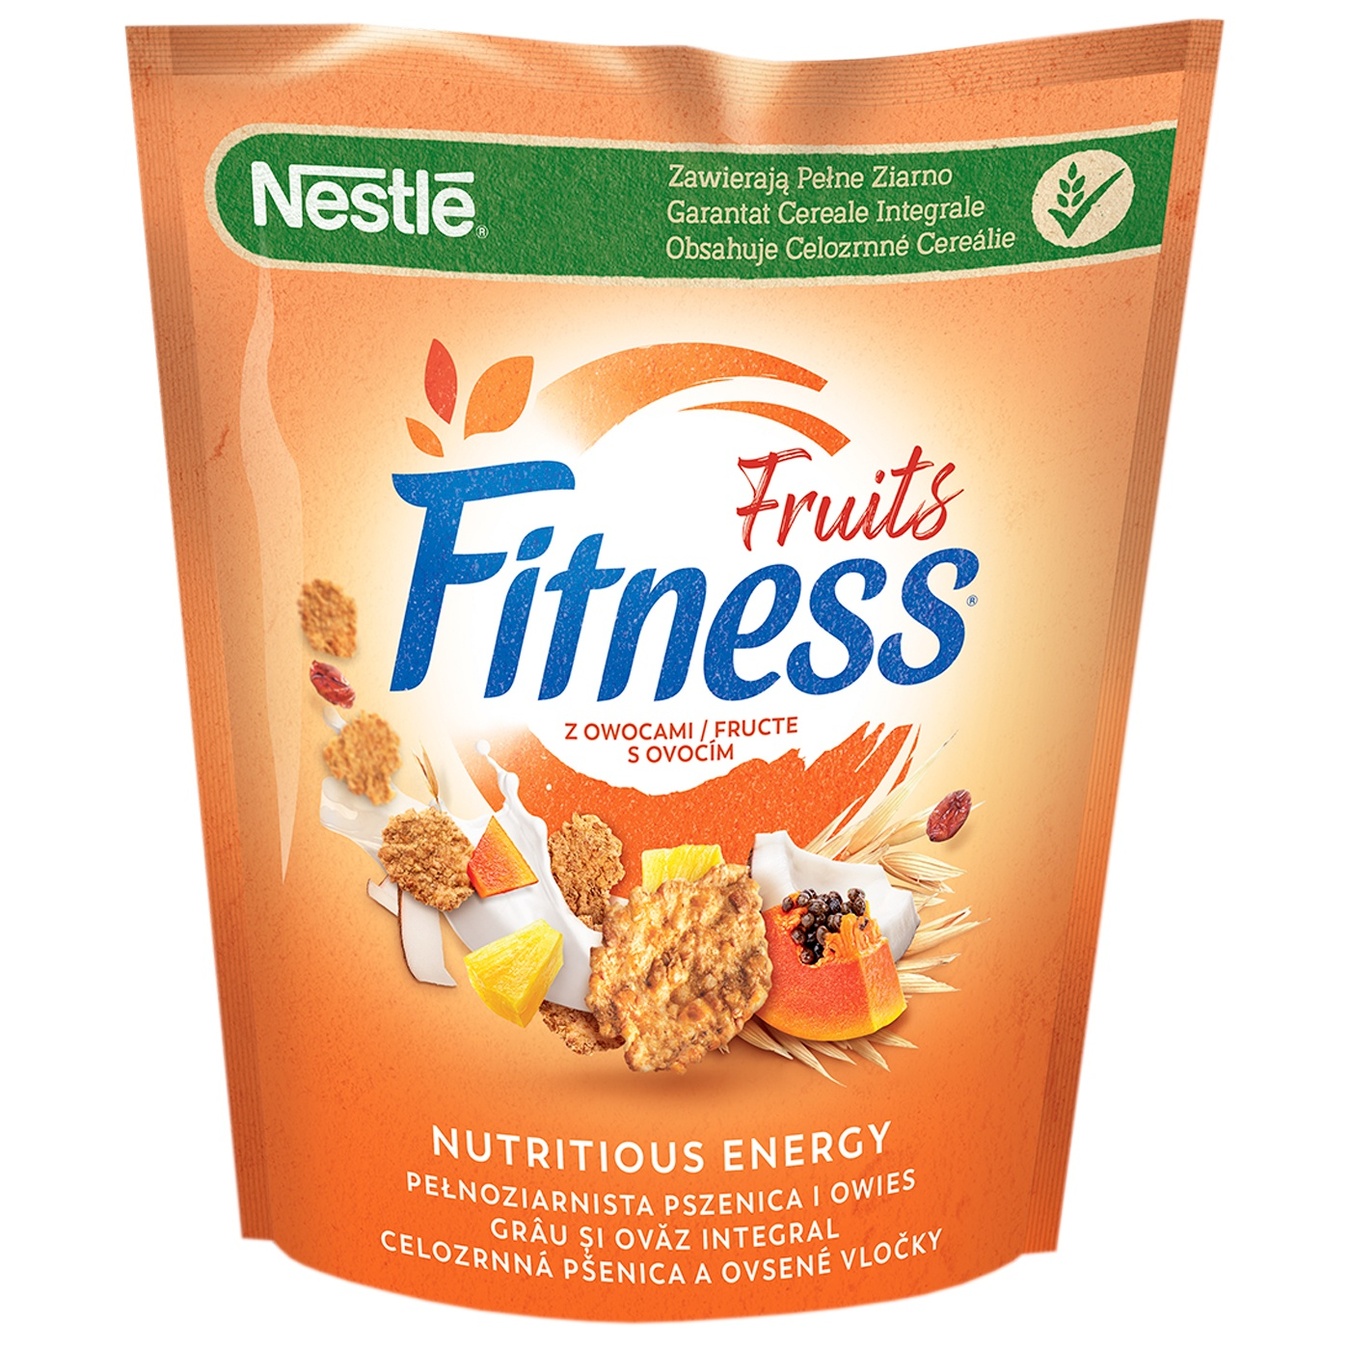 Nestle Fitness & Fruits whole grain cereal 225g